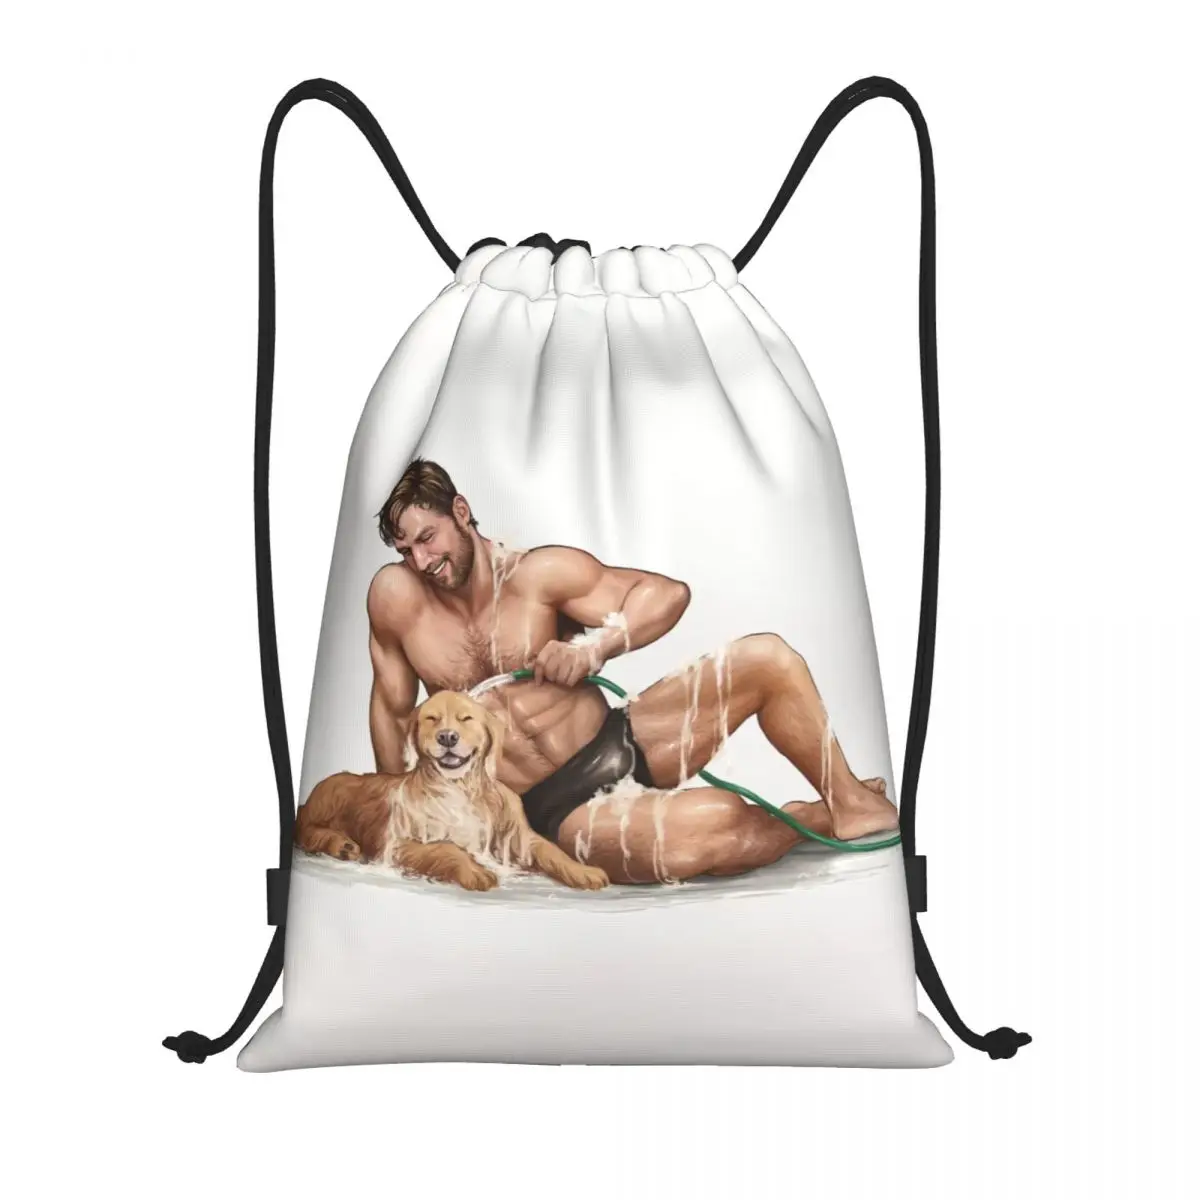 

Handsome Sexy Male Boy Guy Gay Art Drawstring Bags for Shopping Yoga Backpacks Women Men Tempting Muscle Man Sports Gym Sackpack